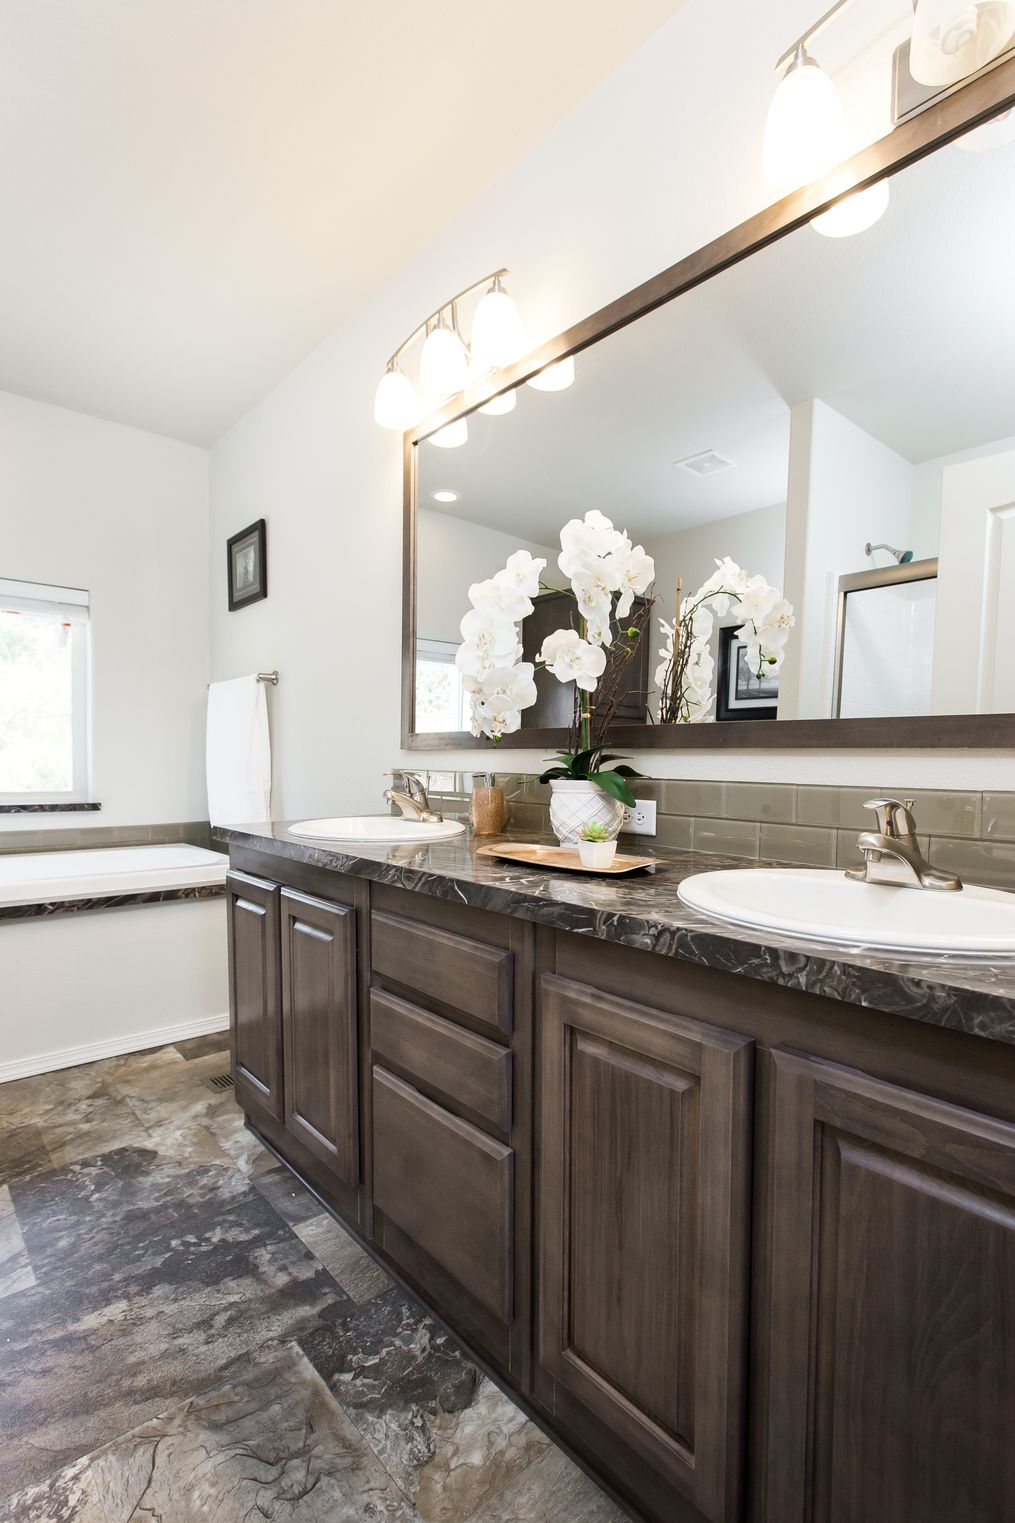 The 2868 MARLETTE SPECIAL Primary Bathroom. This Manufactured Mobile Home features 3 bedrooms and 2.5 baths.